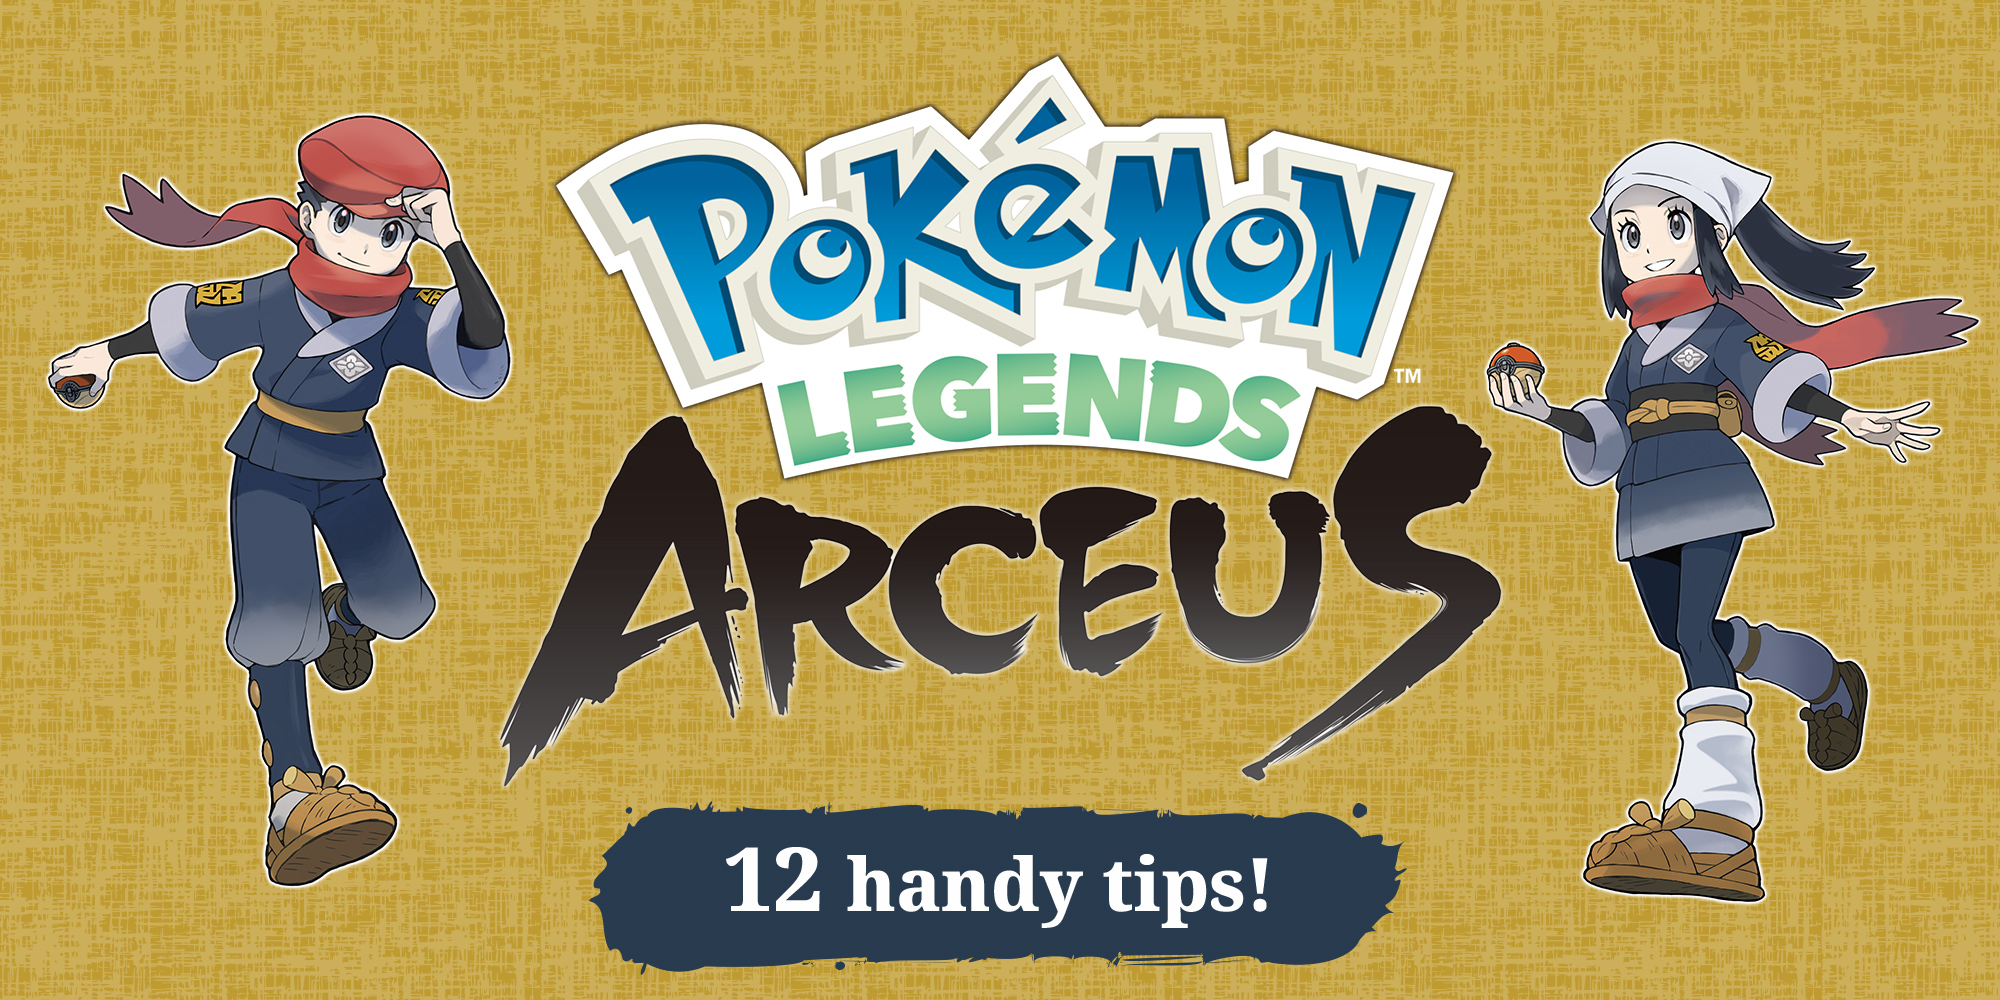 6 other historical settings we want Pokemon to visit after Legends: Arceus